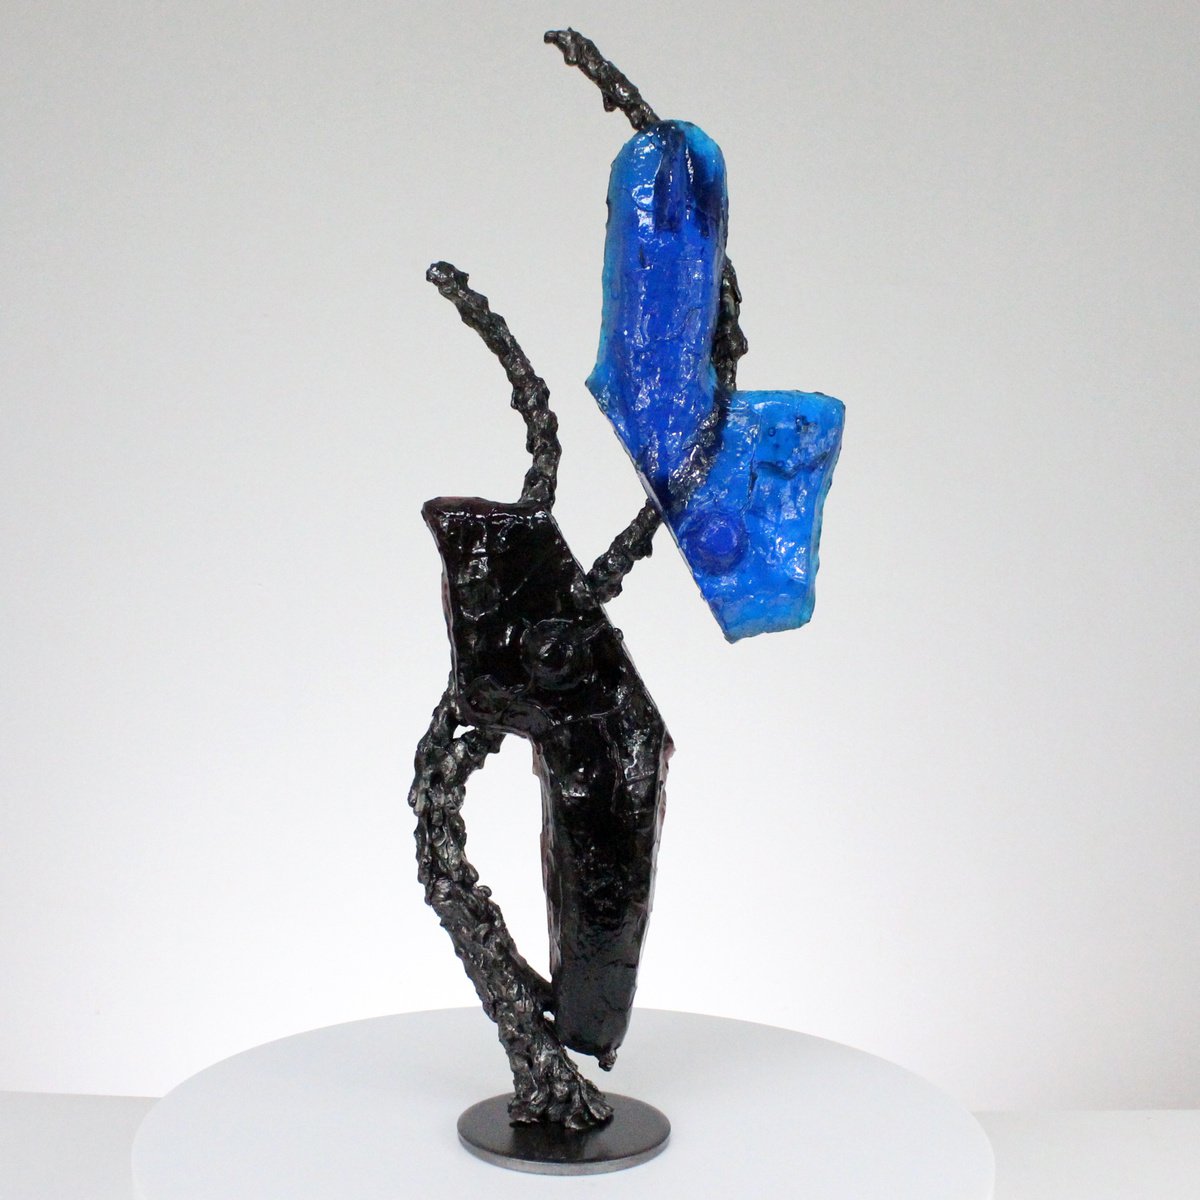 Idol CLXVI - Metal sculpture body molten glass and steel by Philippe Buil